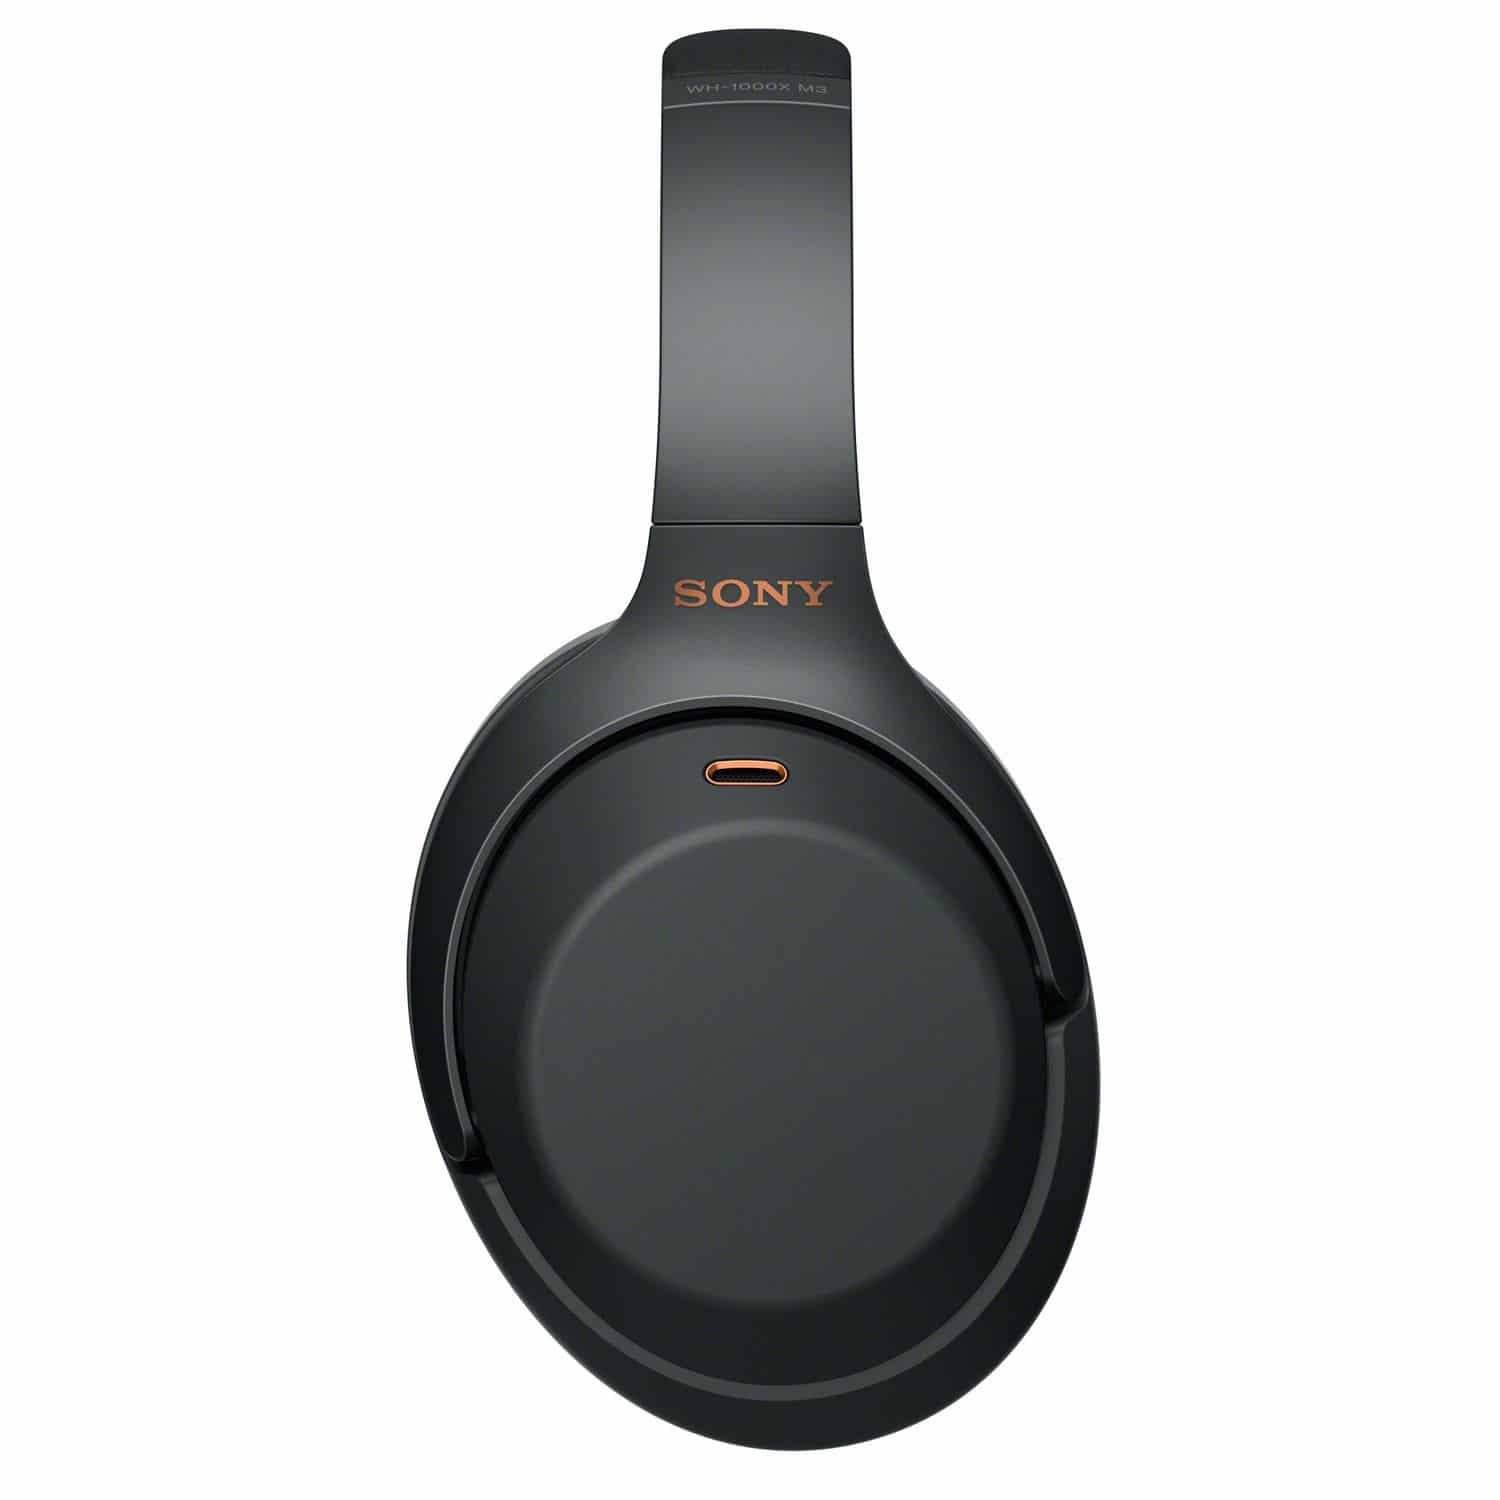 SONY WH1000XM3 WIRELESS NOISE CANCELING OVER-EAR HEADPHONES.